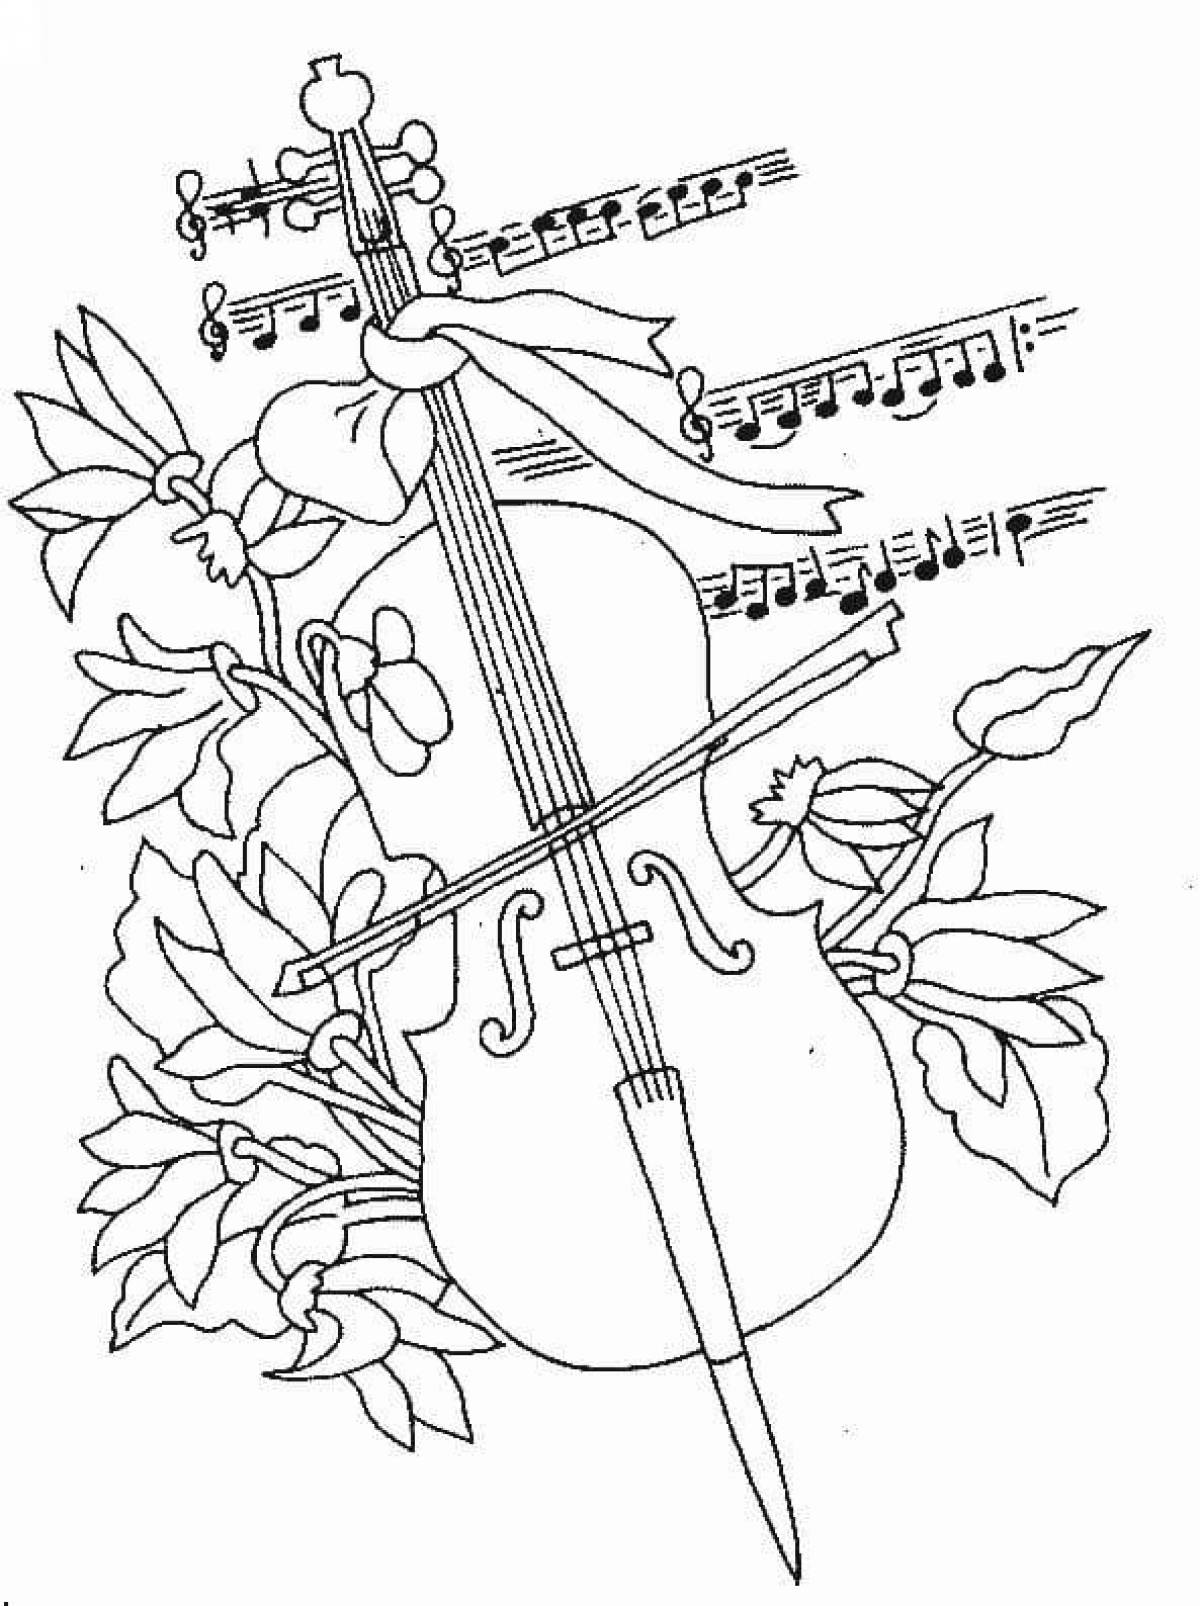 Colorfully done violin coloring page